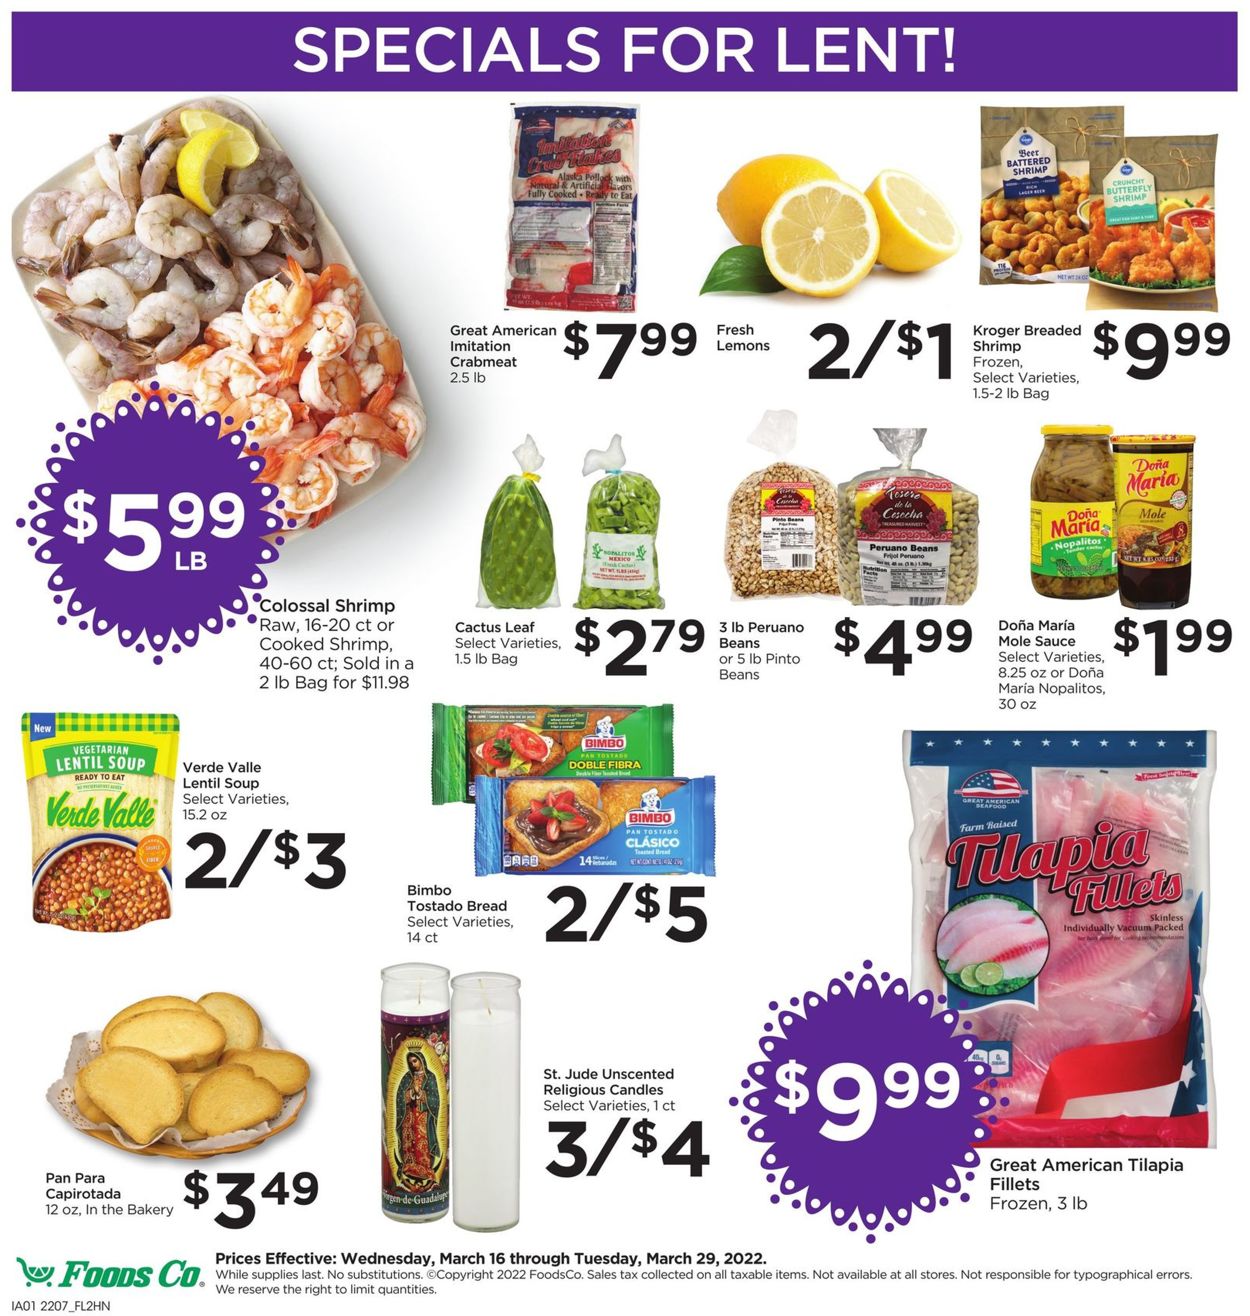 Foods Co. Ad from 03/23/2022